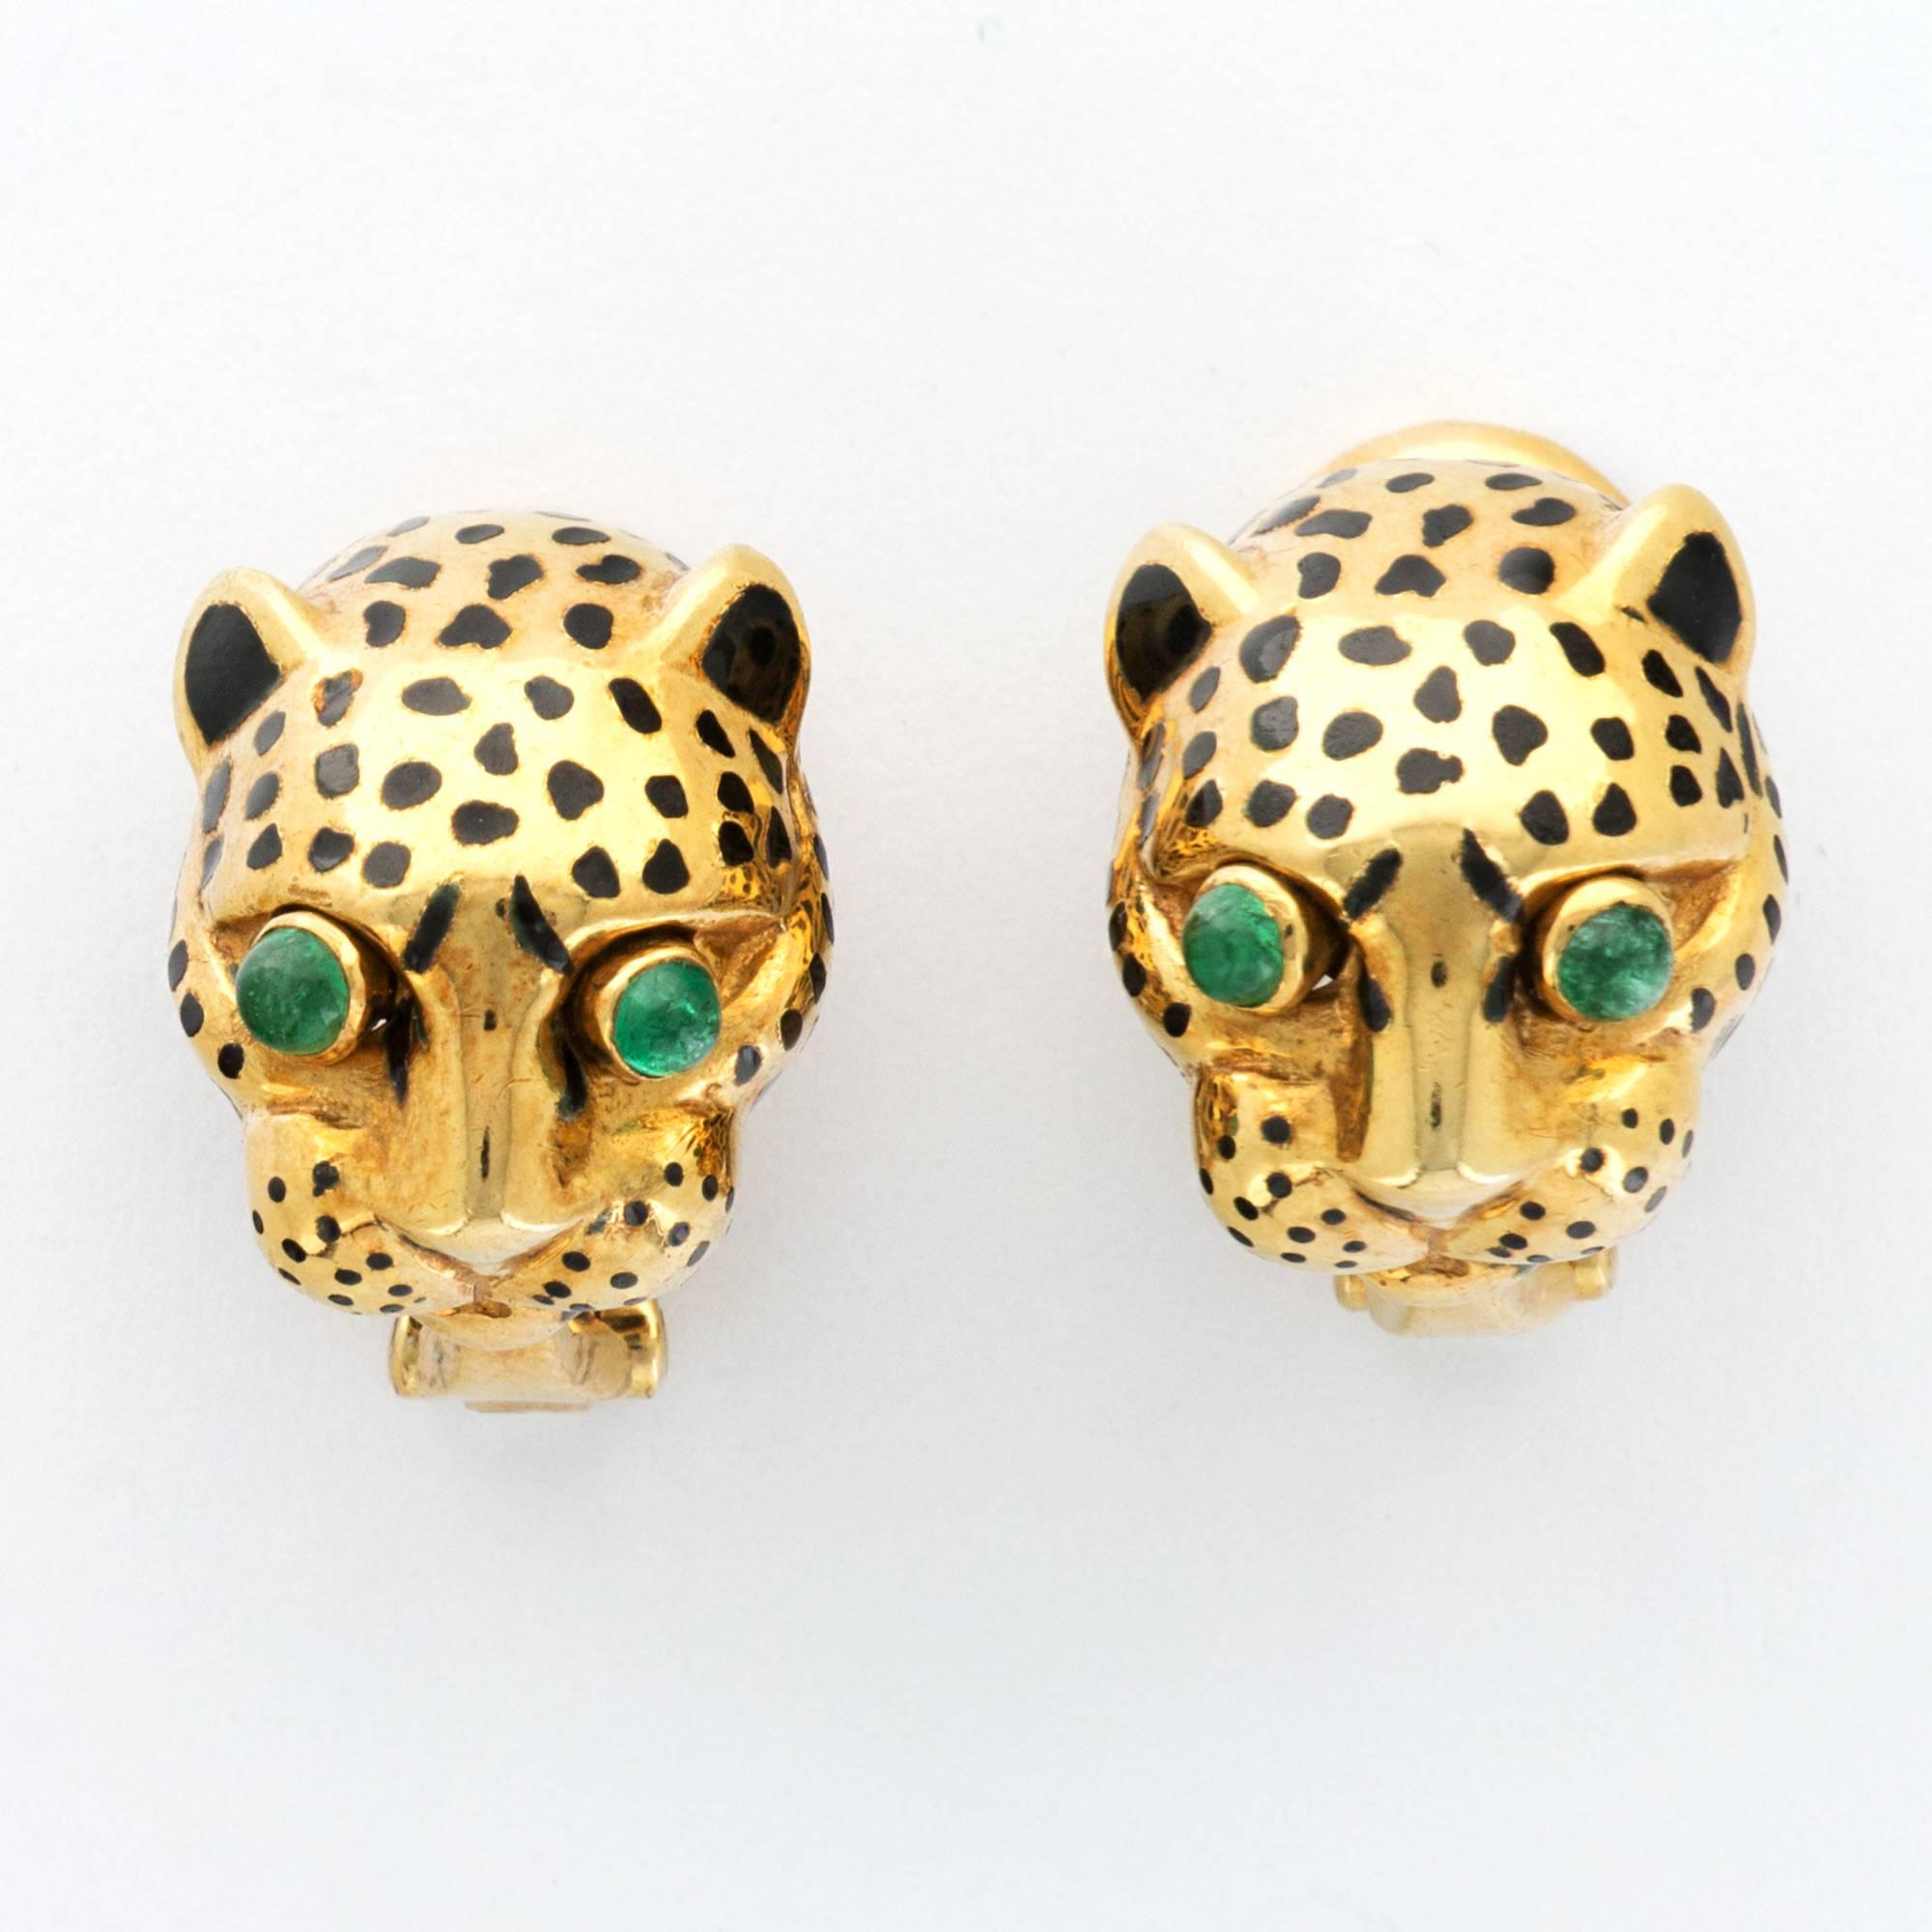 A Pair of David Webb Panther Earrings Mounted in 18k Yellow Gold. Green . Black Enamel. Stamped with Markers Marks, "WEBB"